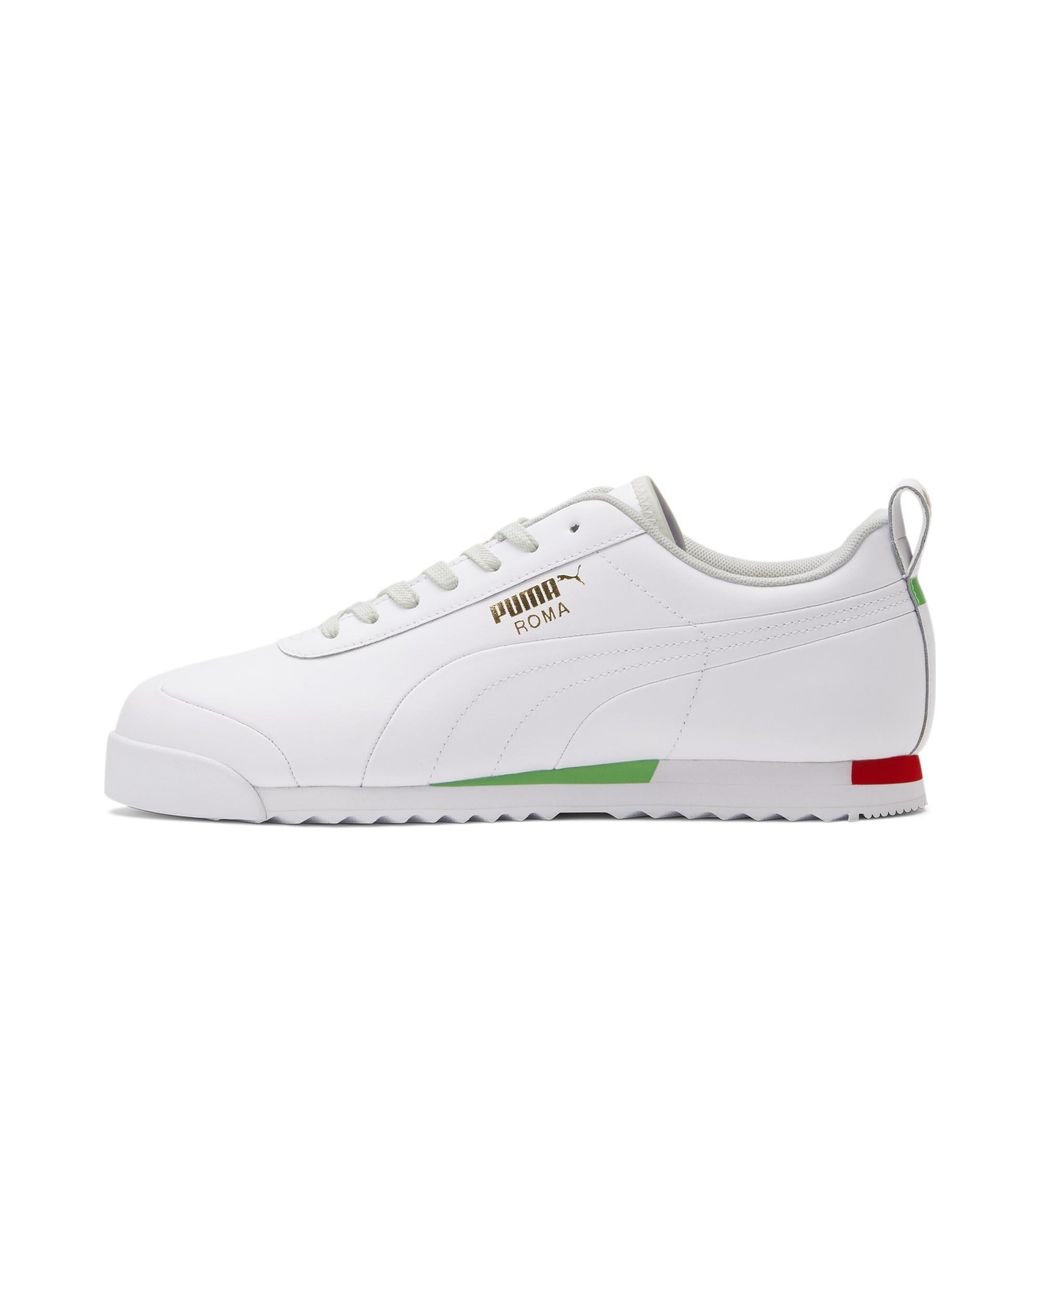 PUMA Leather Roma Italy Sneakers in White | Lyst